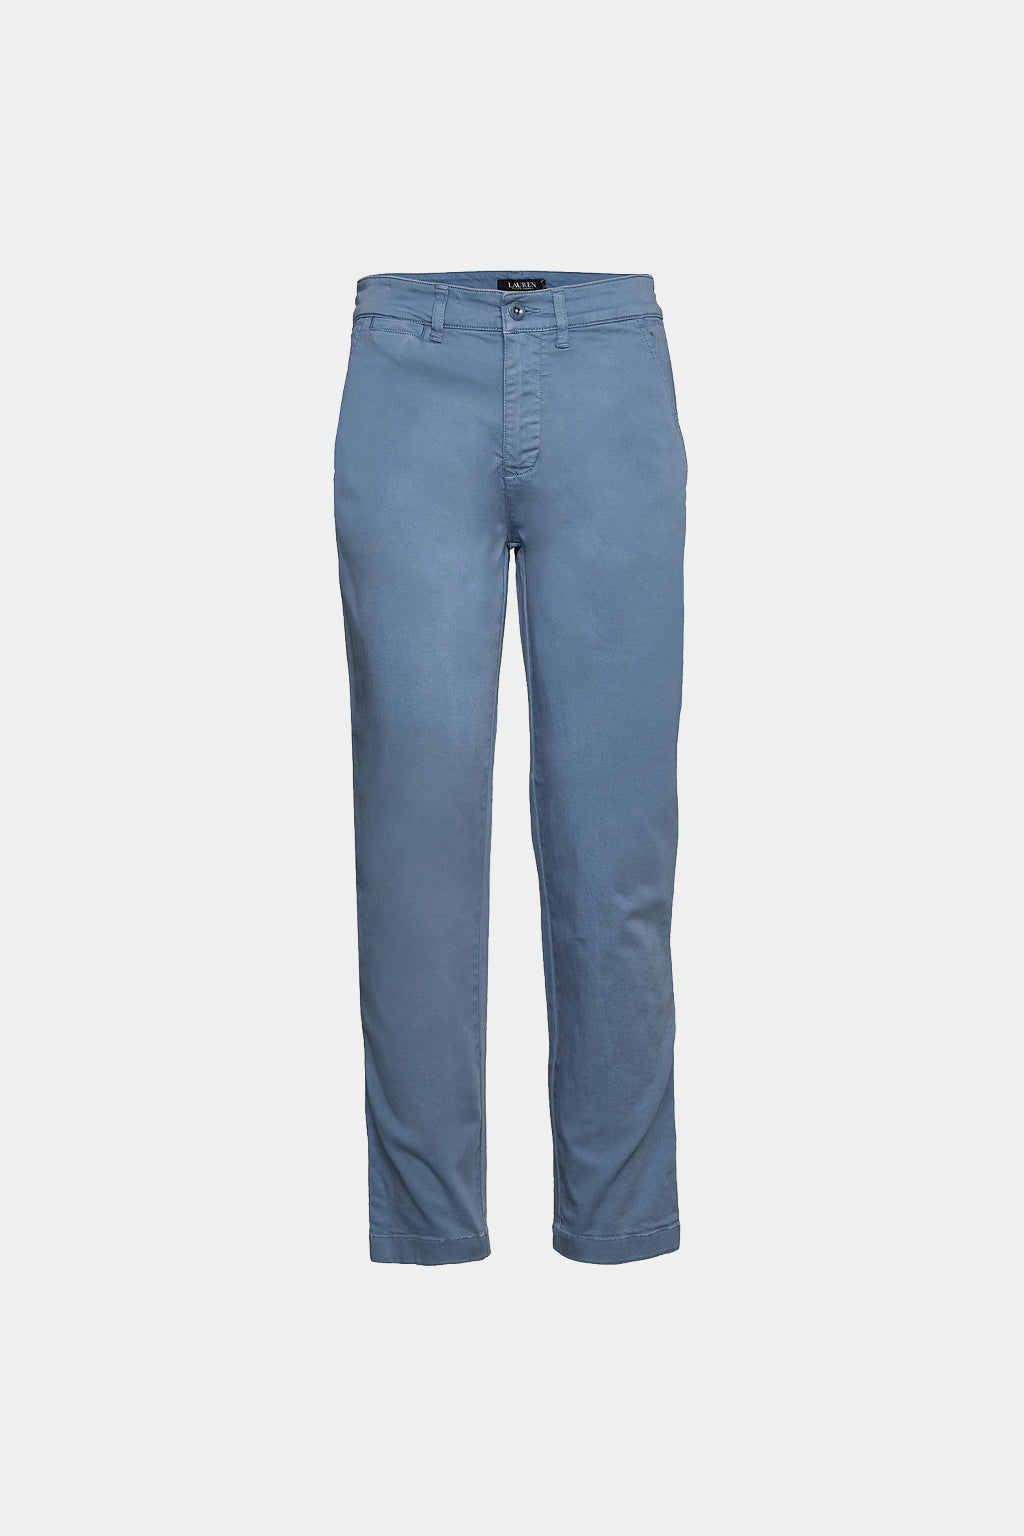 Ralph Lauren - Slim Fit Stretch Chino Pant - Trousers